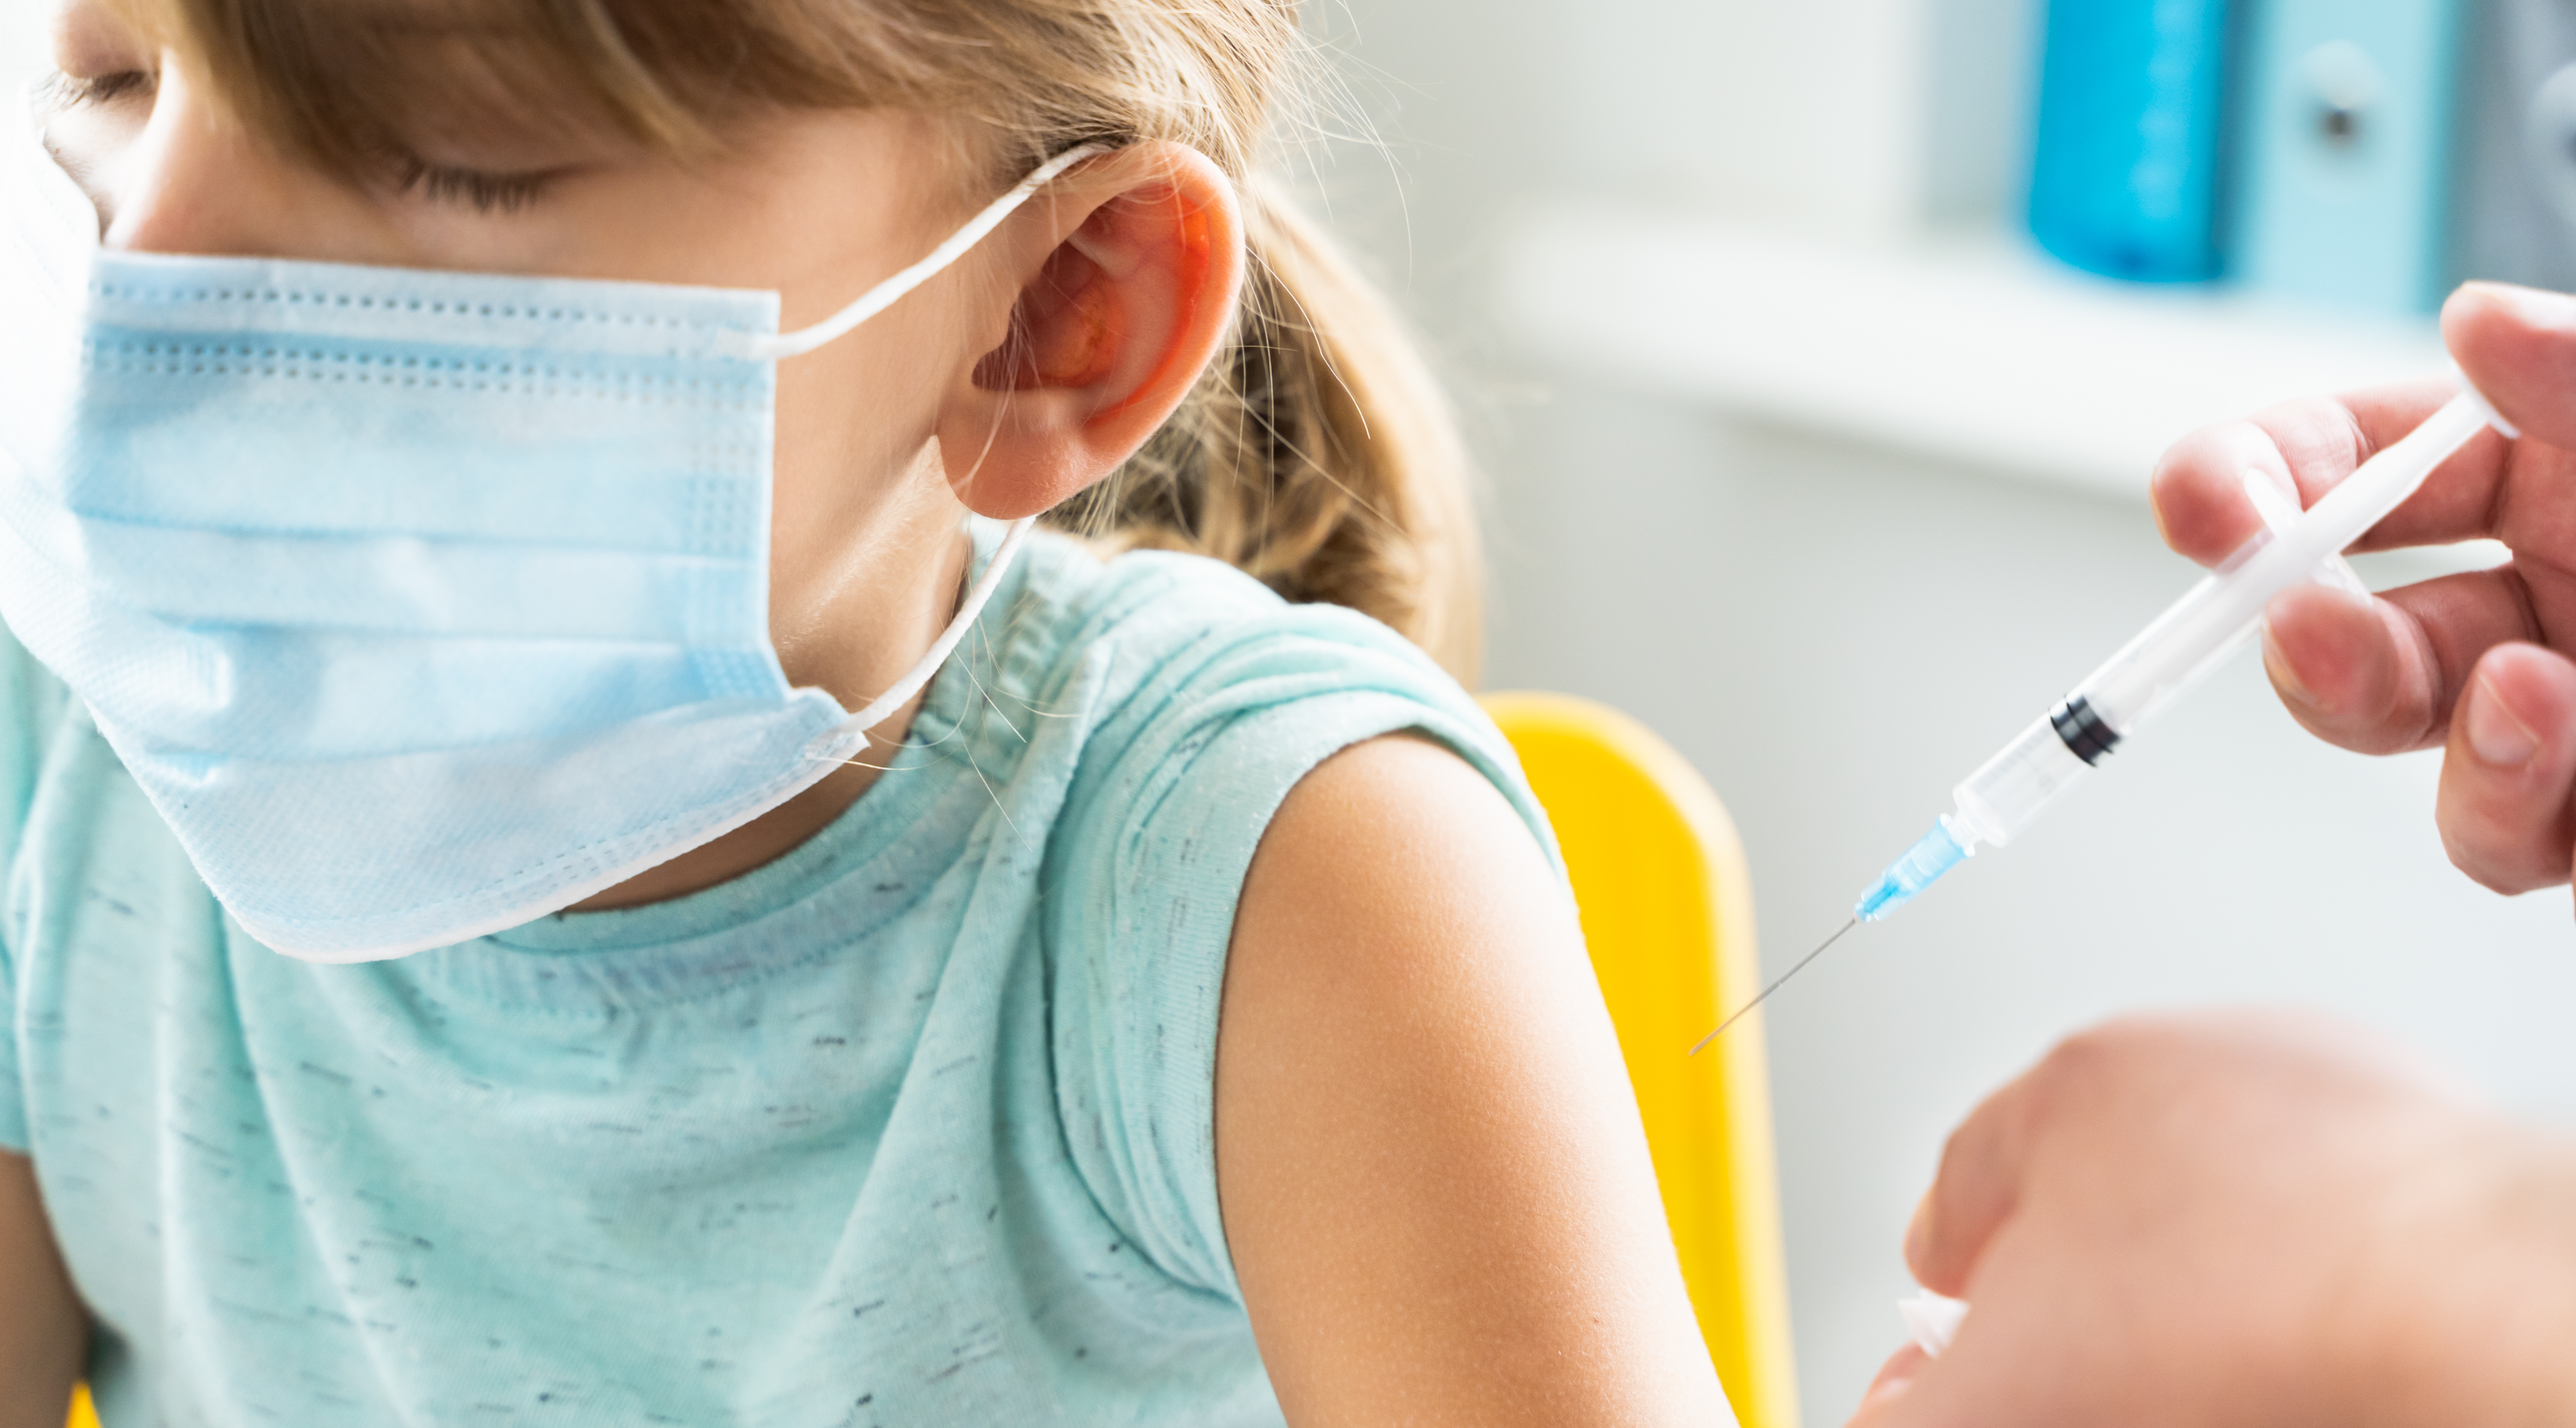 Can Private School Students Avoid Vaccination?